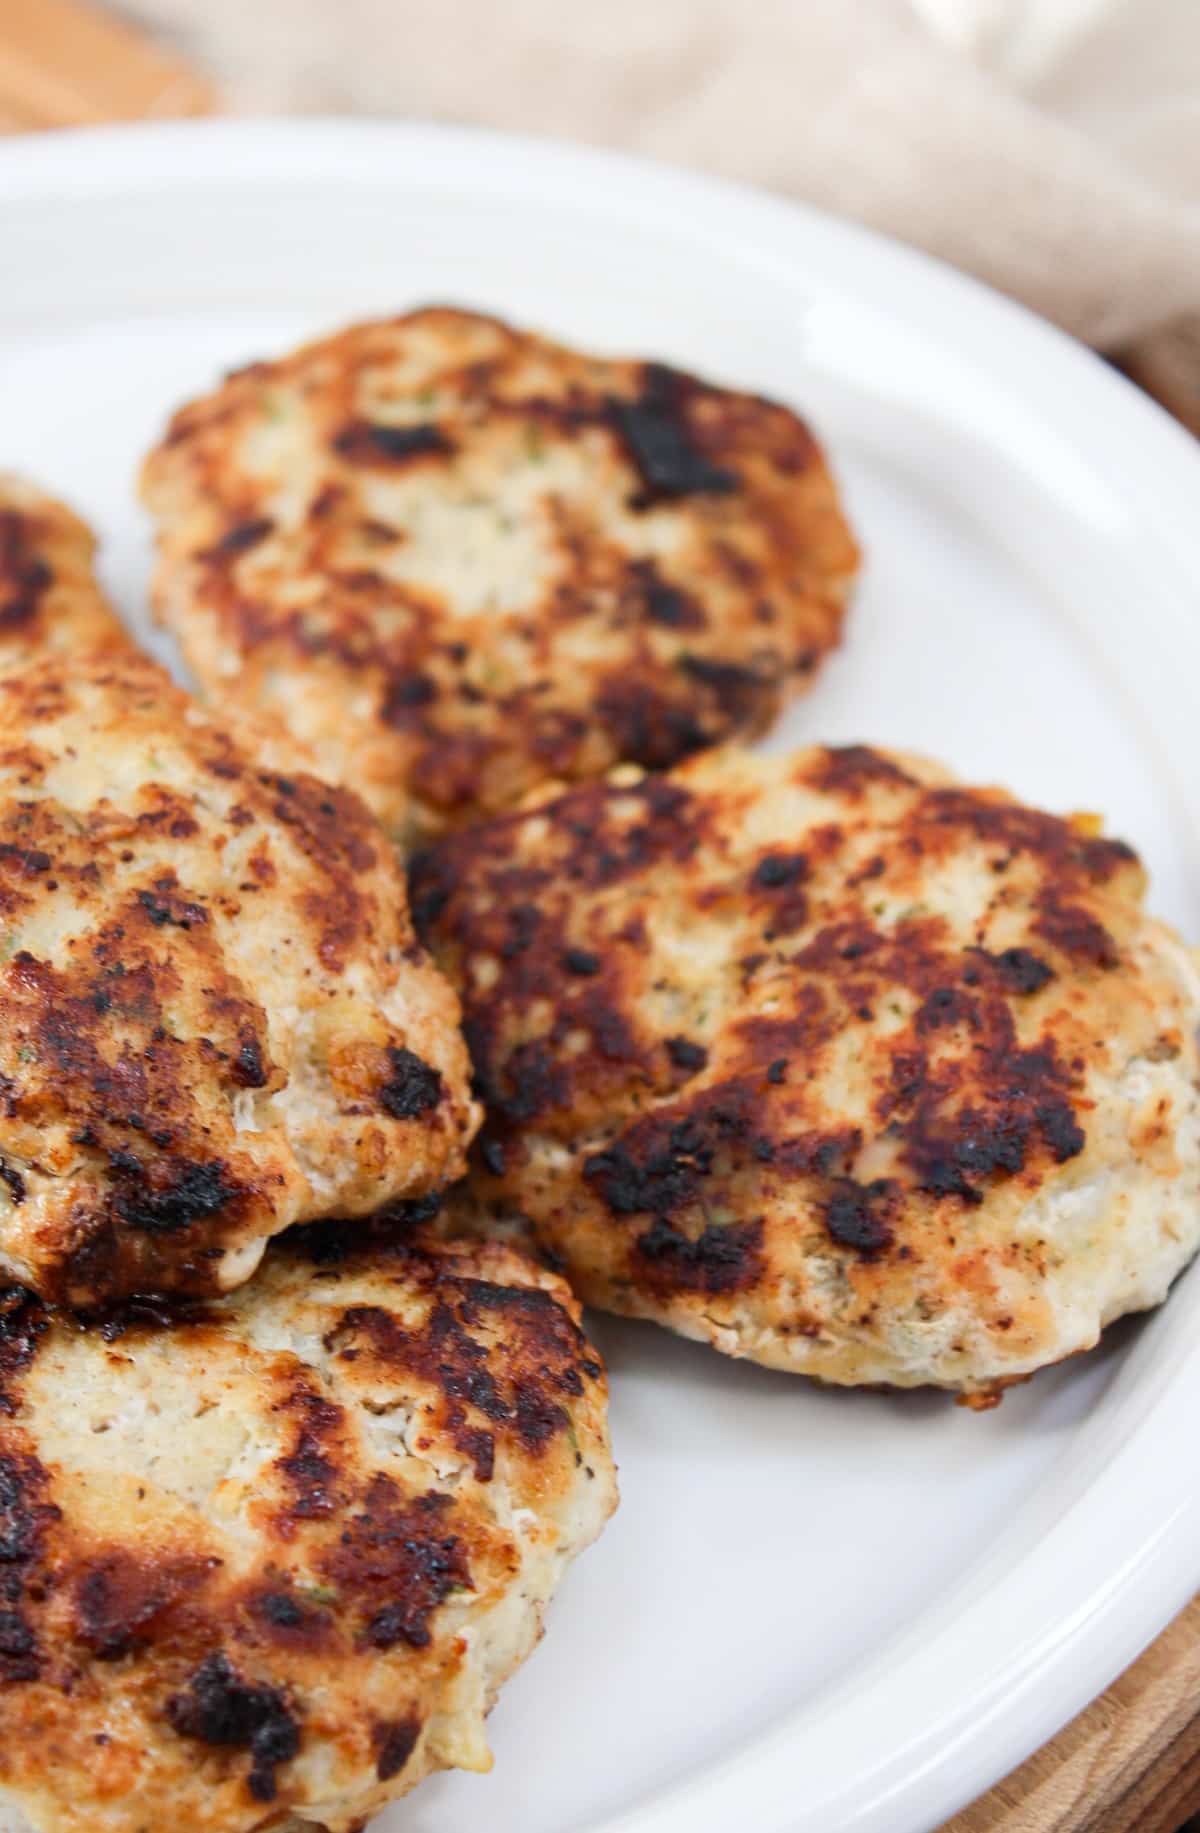 chicken formed into sausage patties. Cooked in a skillet till golden brown and served on a white plate.